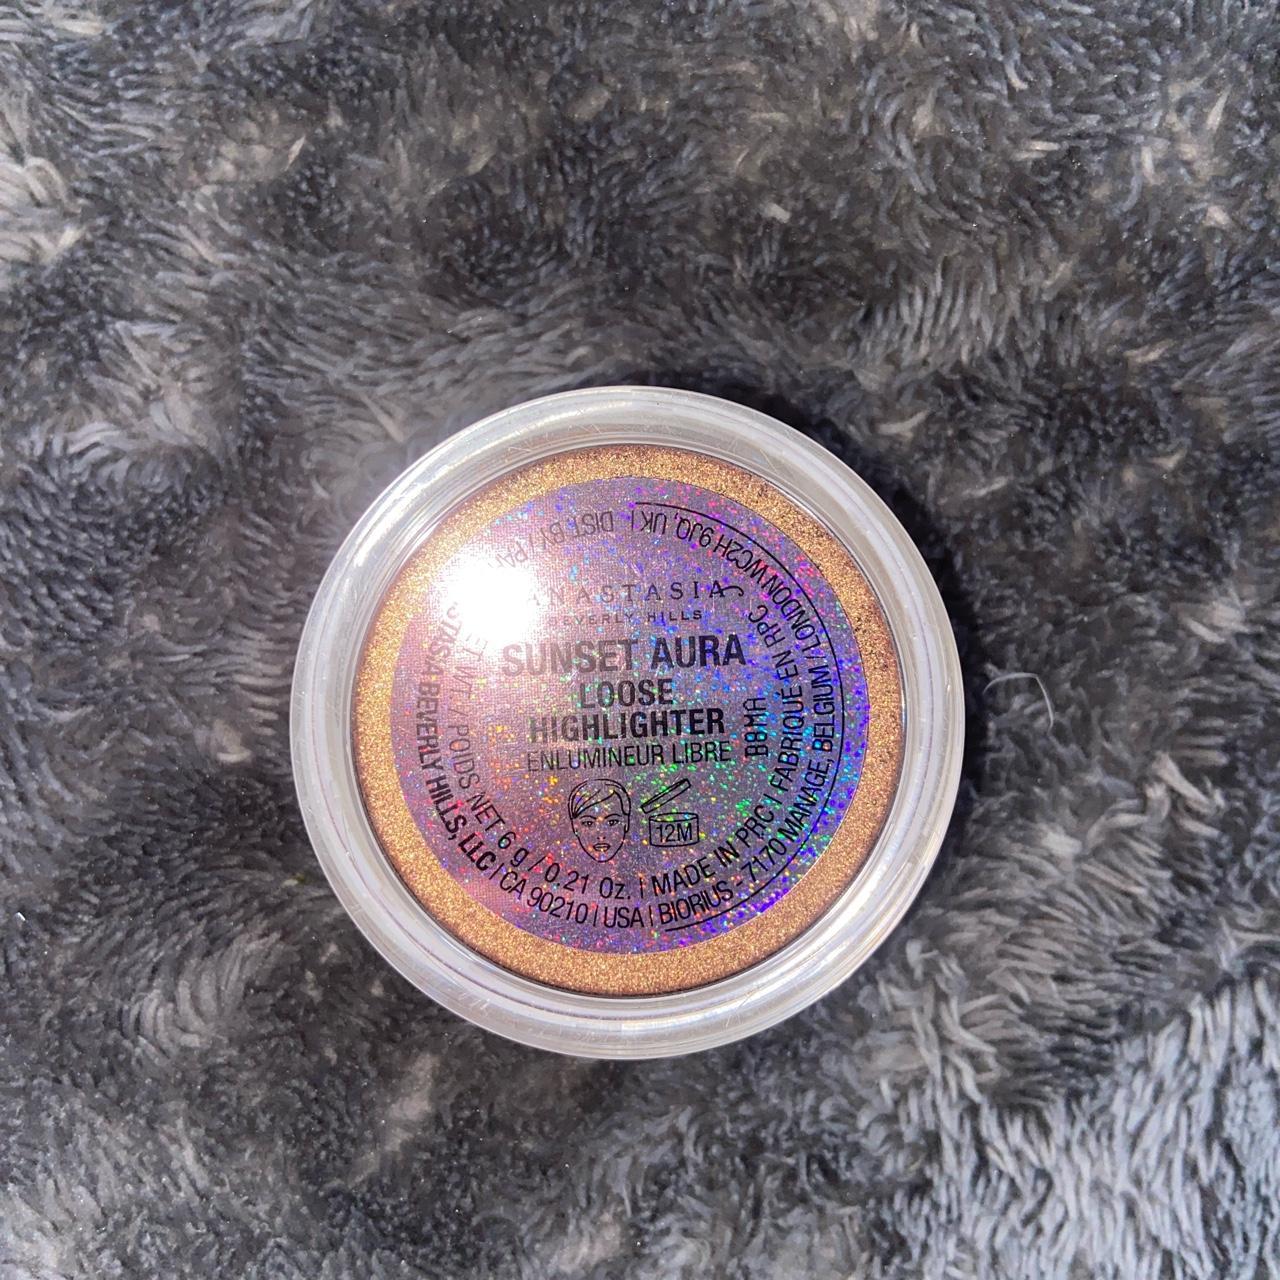 Product Image 2 - Anastasia Beverley Hills loose highlighter.